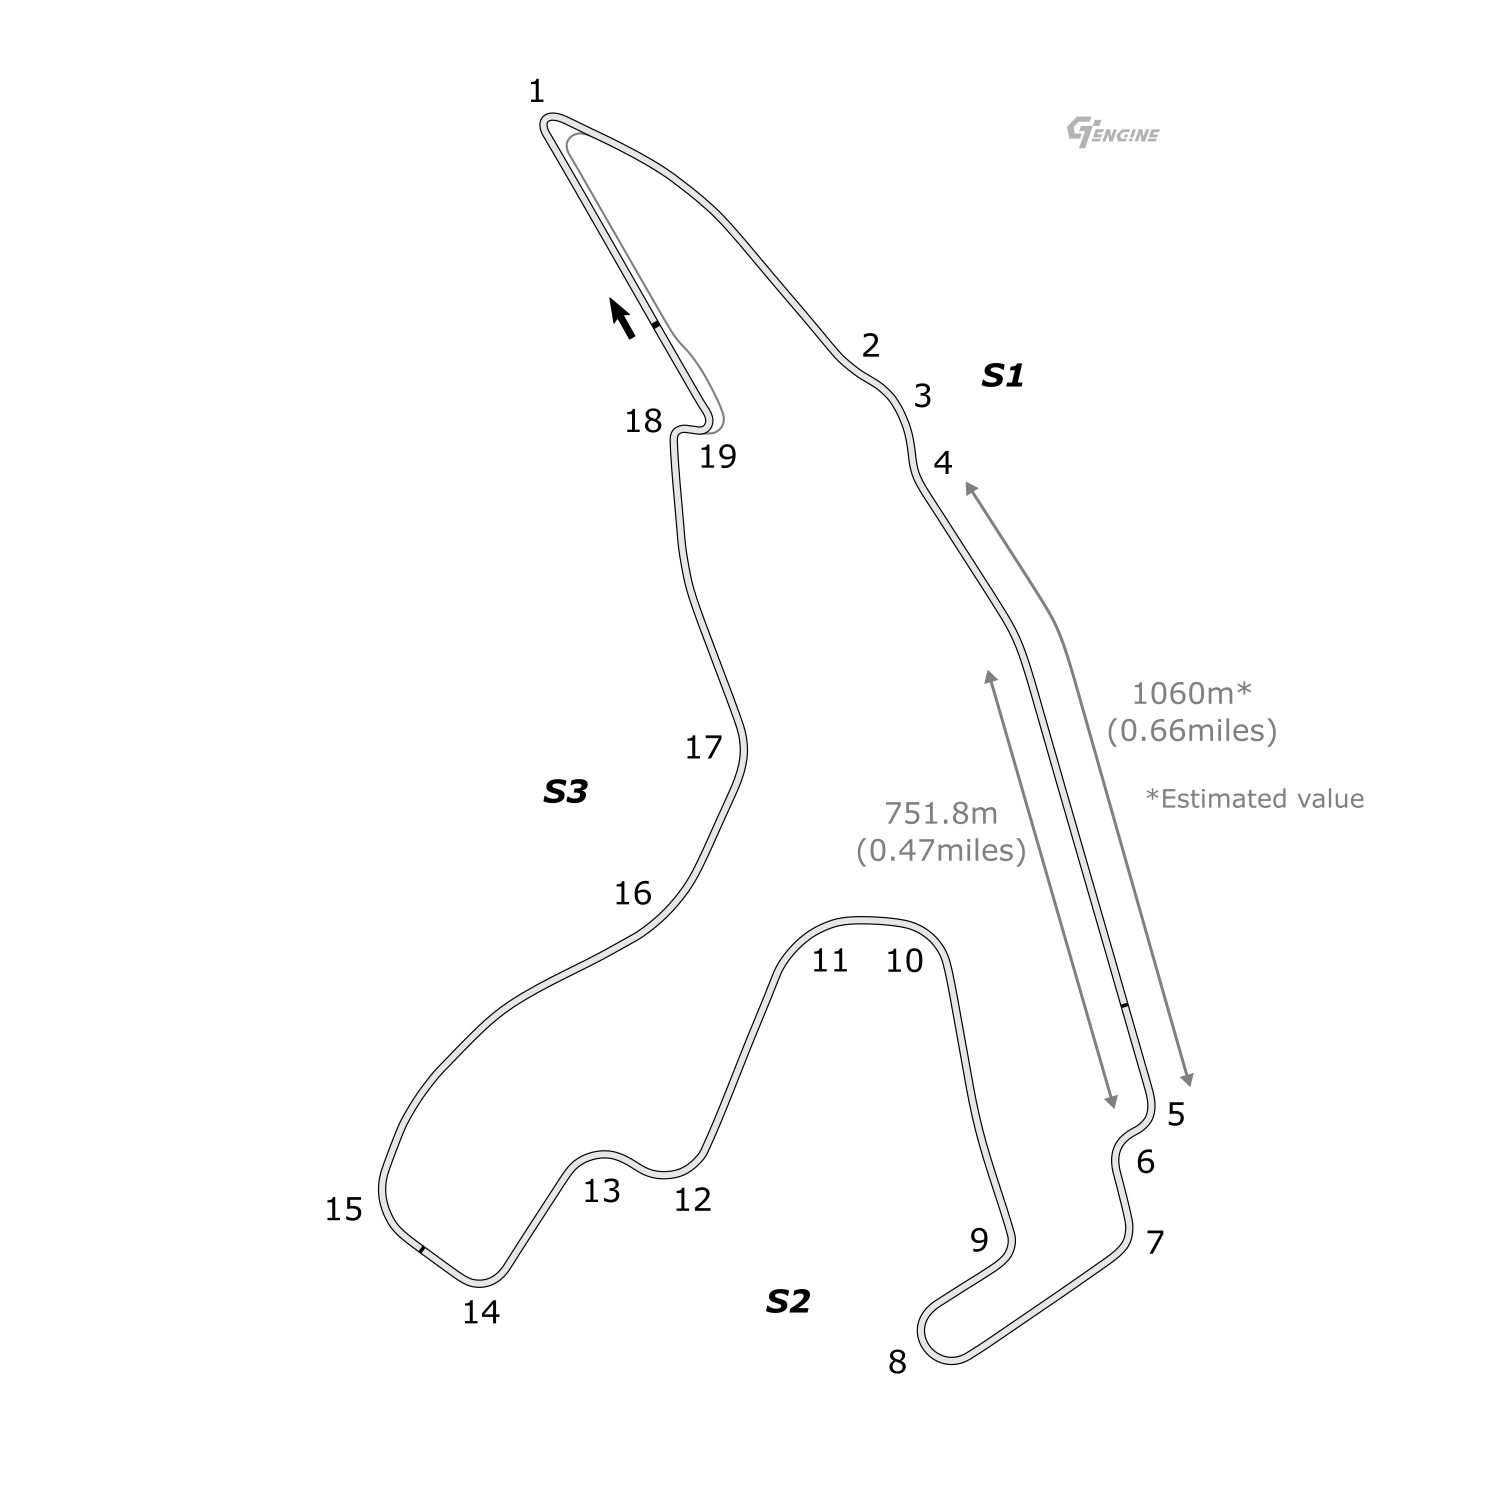 Spa-Francorchamps track map